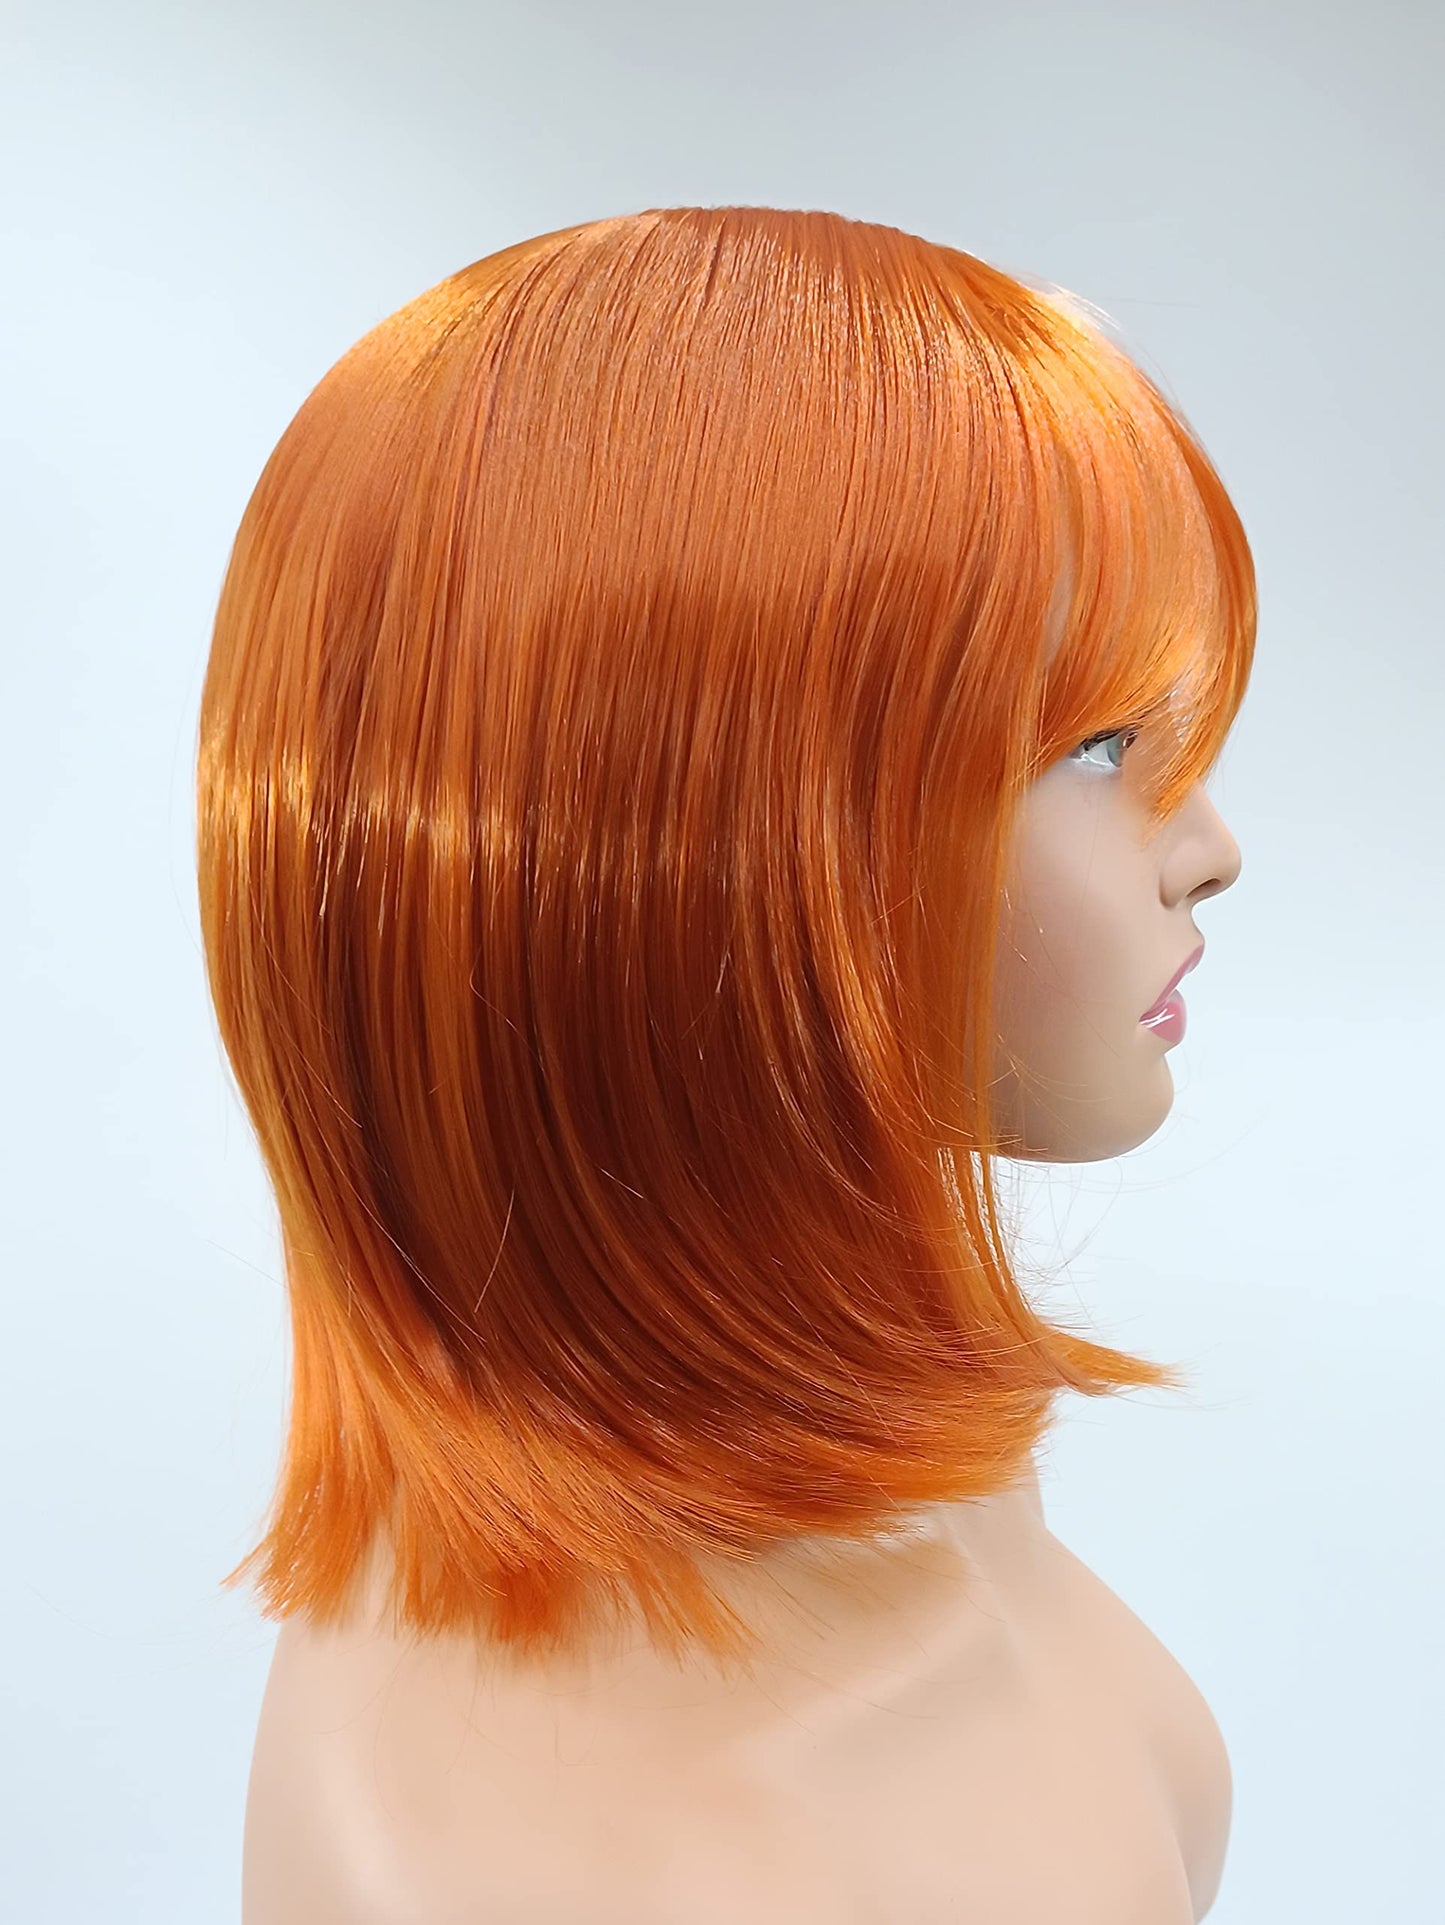 PORT&LOTUS Orange Wig Bob Wig Short Wig Ginger Wig Straight Wig with Bangs Wigs for White Women Cosplay Wig Synthetic Wig Heat Resistant Hair for Daily Party (Orange 14 inch)